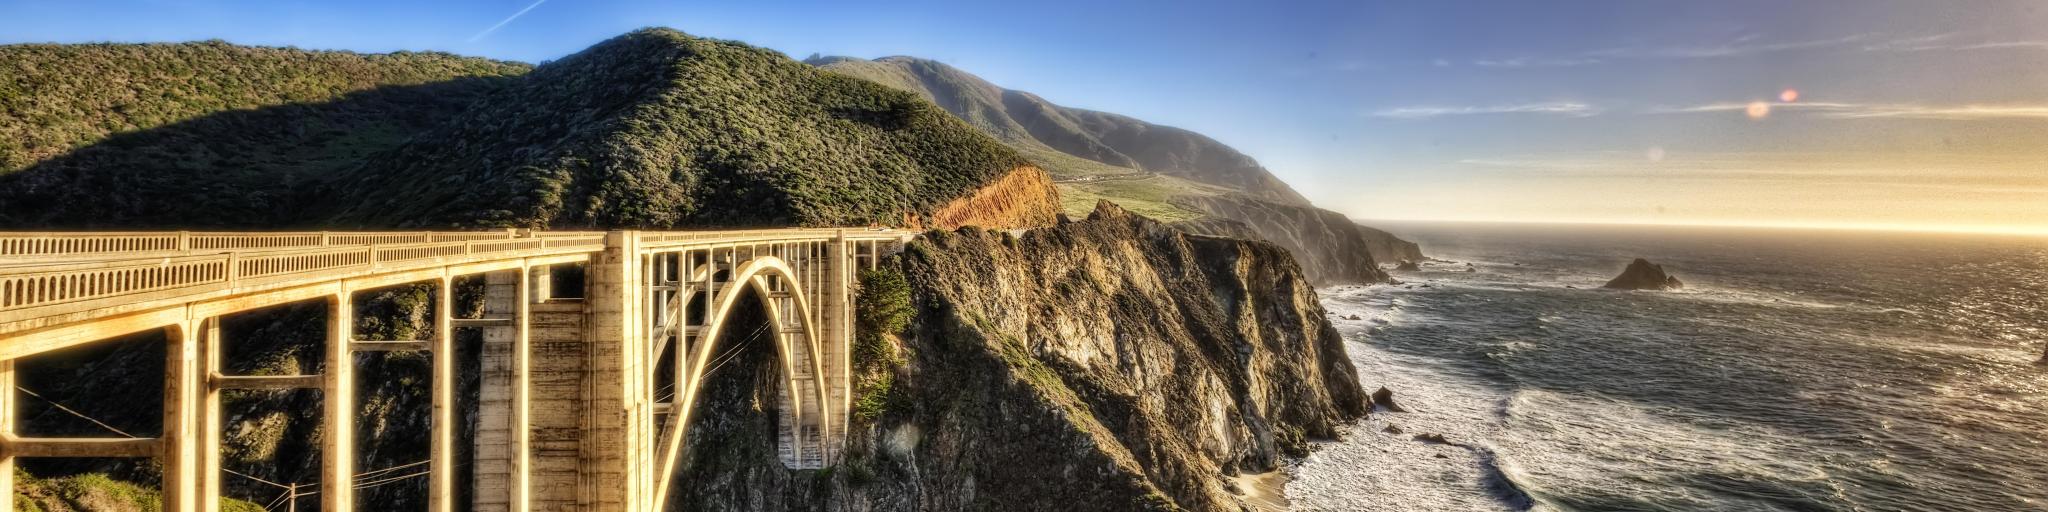 Bixby Creek Bridge, USA with the bridge and hills in the distance.